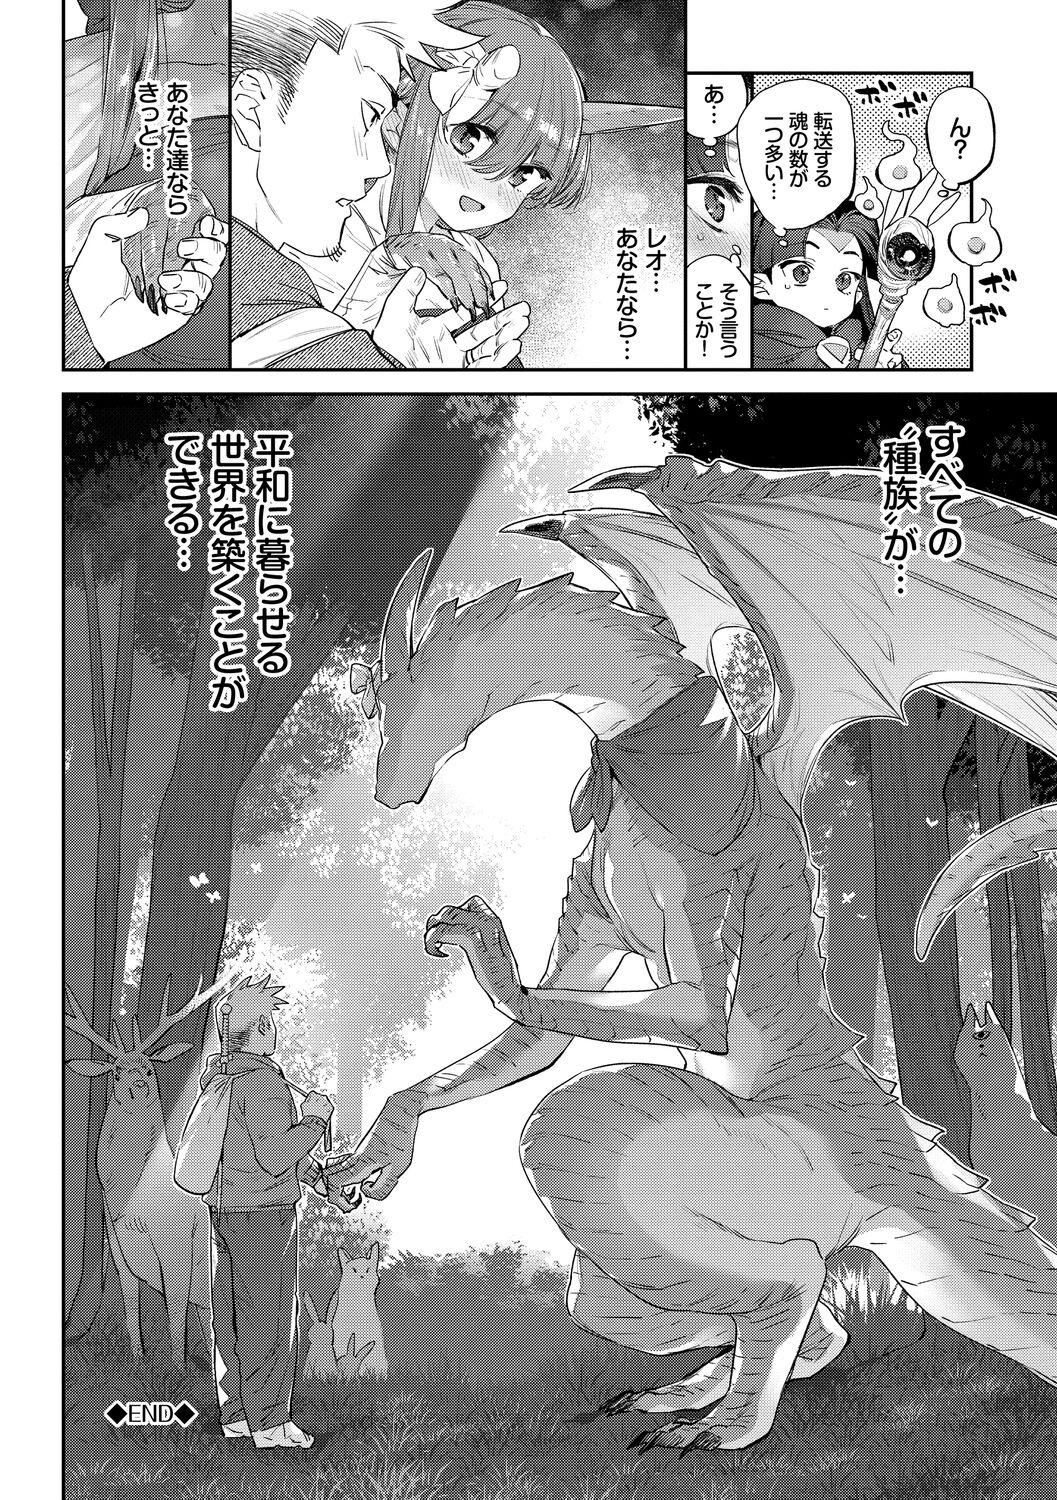 Ihou no Otome - Monster Girls in Another World 223